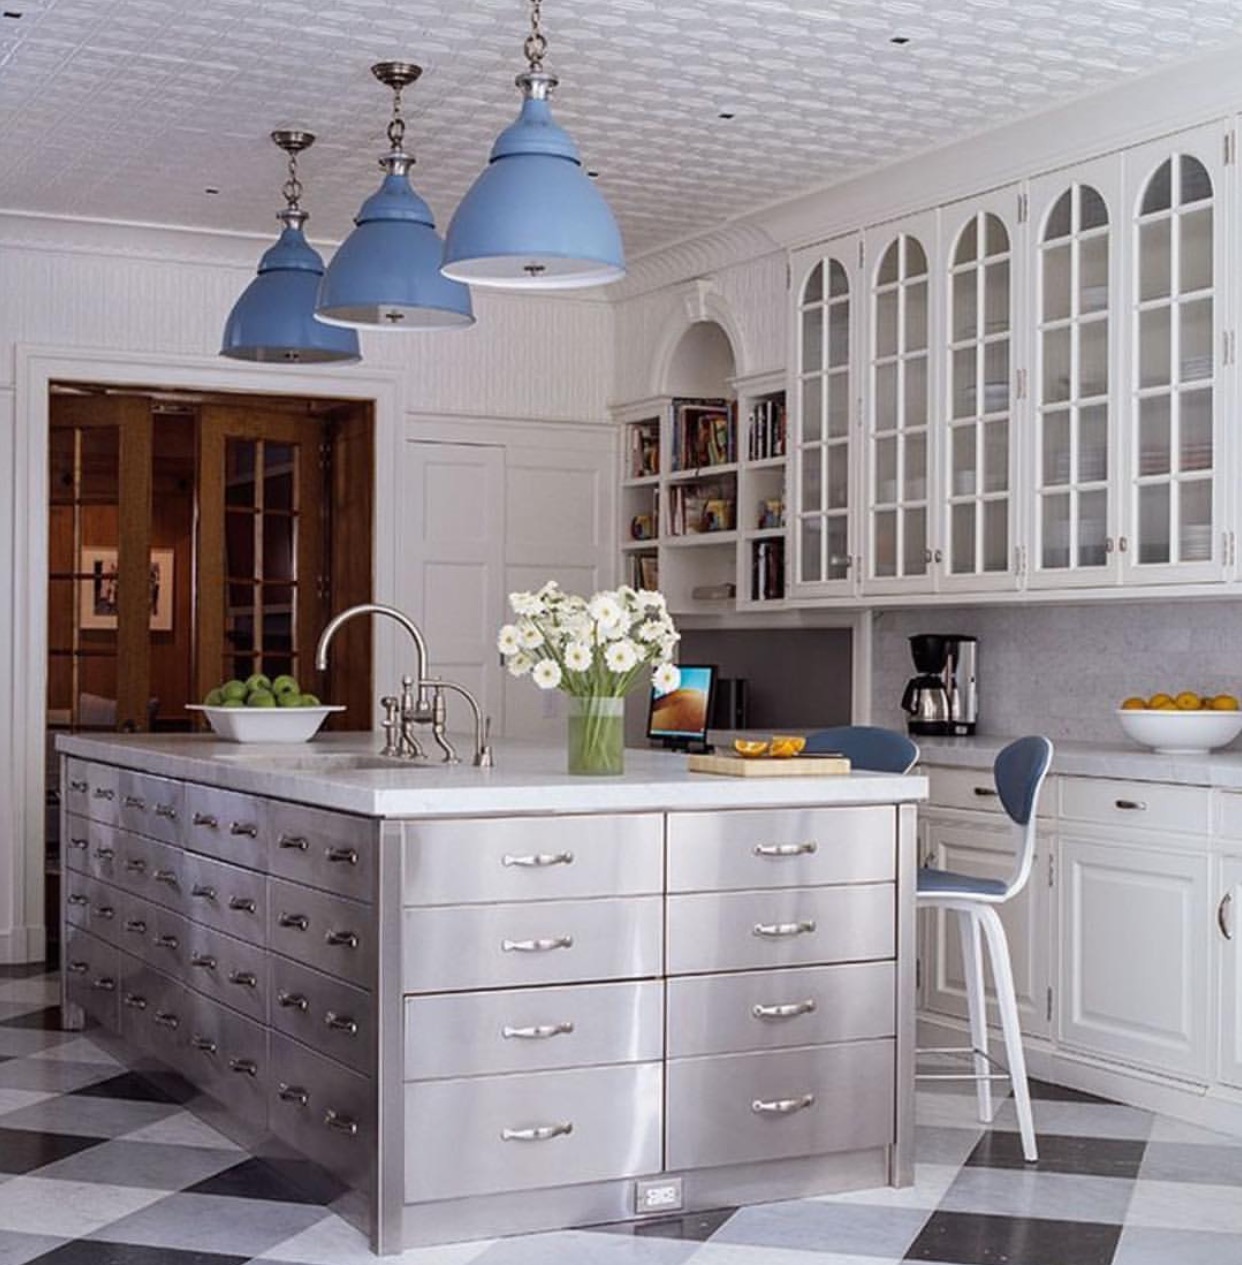 Drawers Galore in This Kitchen | Content in a Cottage